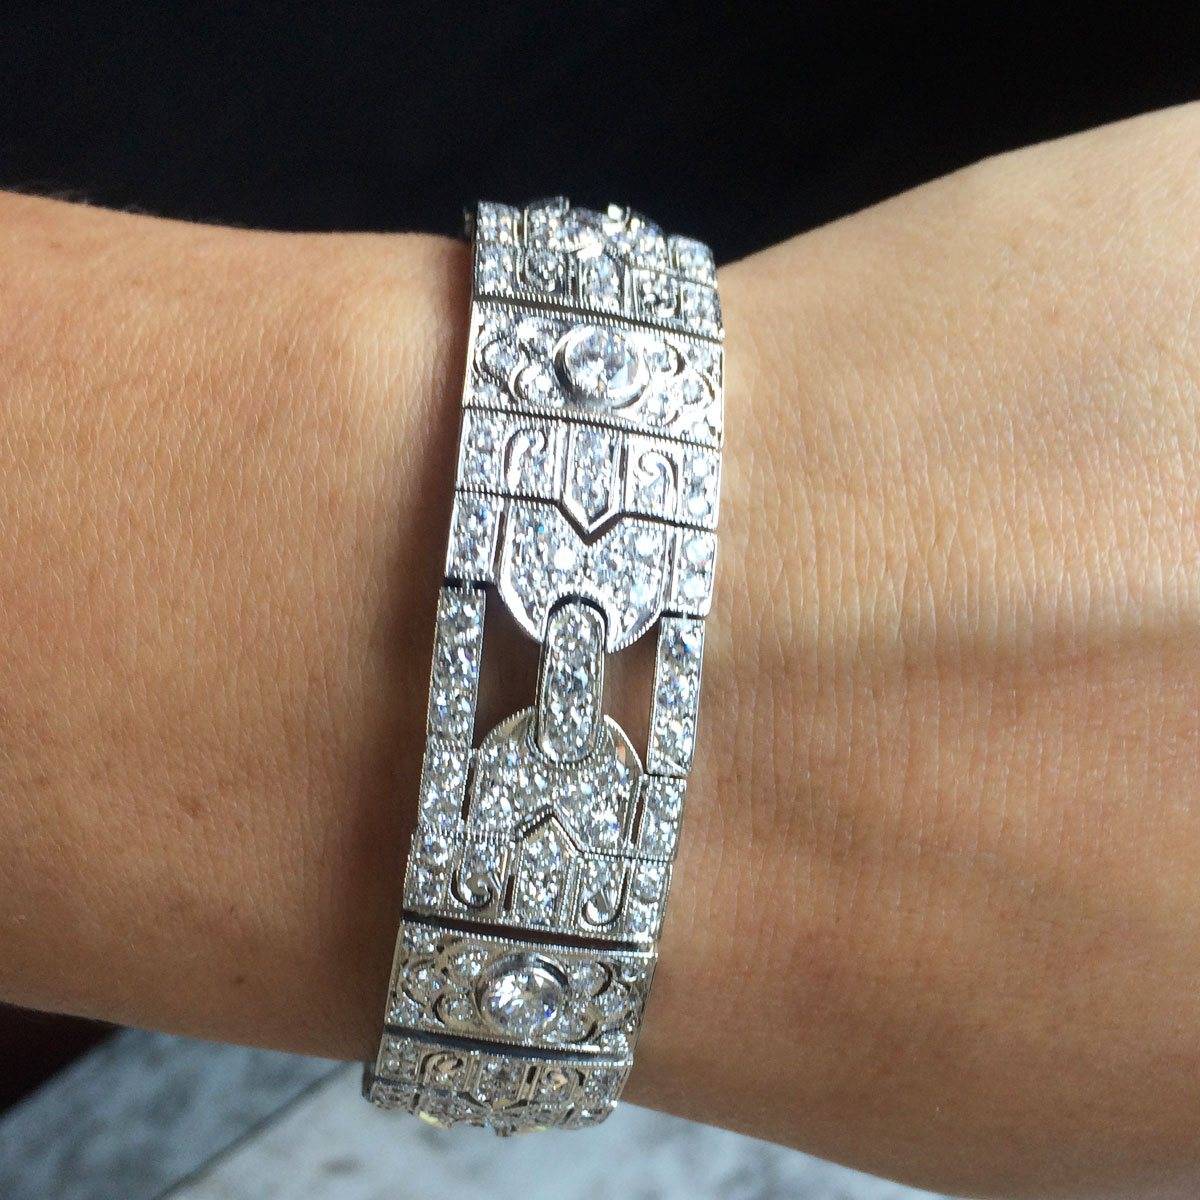 This Art Deco style platinum bracelet is the type of piece that comes to mind when most people think of estate jewelry. Its antique details and opulent carat weight just ooze luxury from a bygone era.